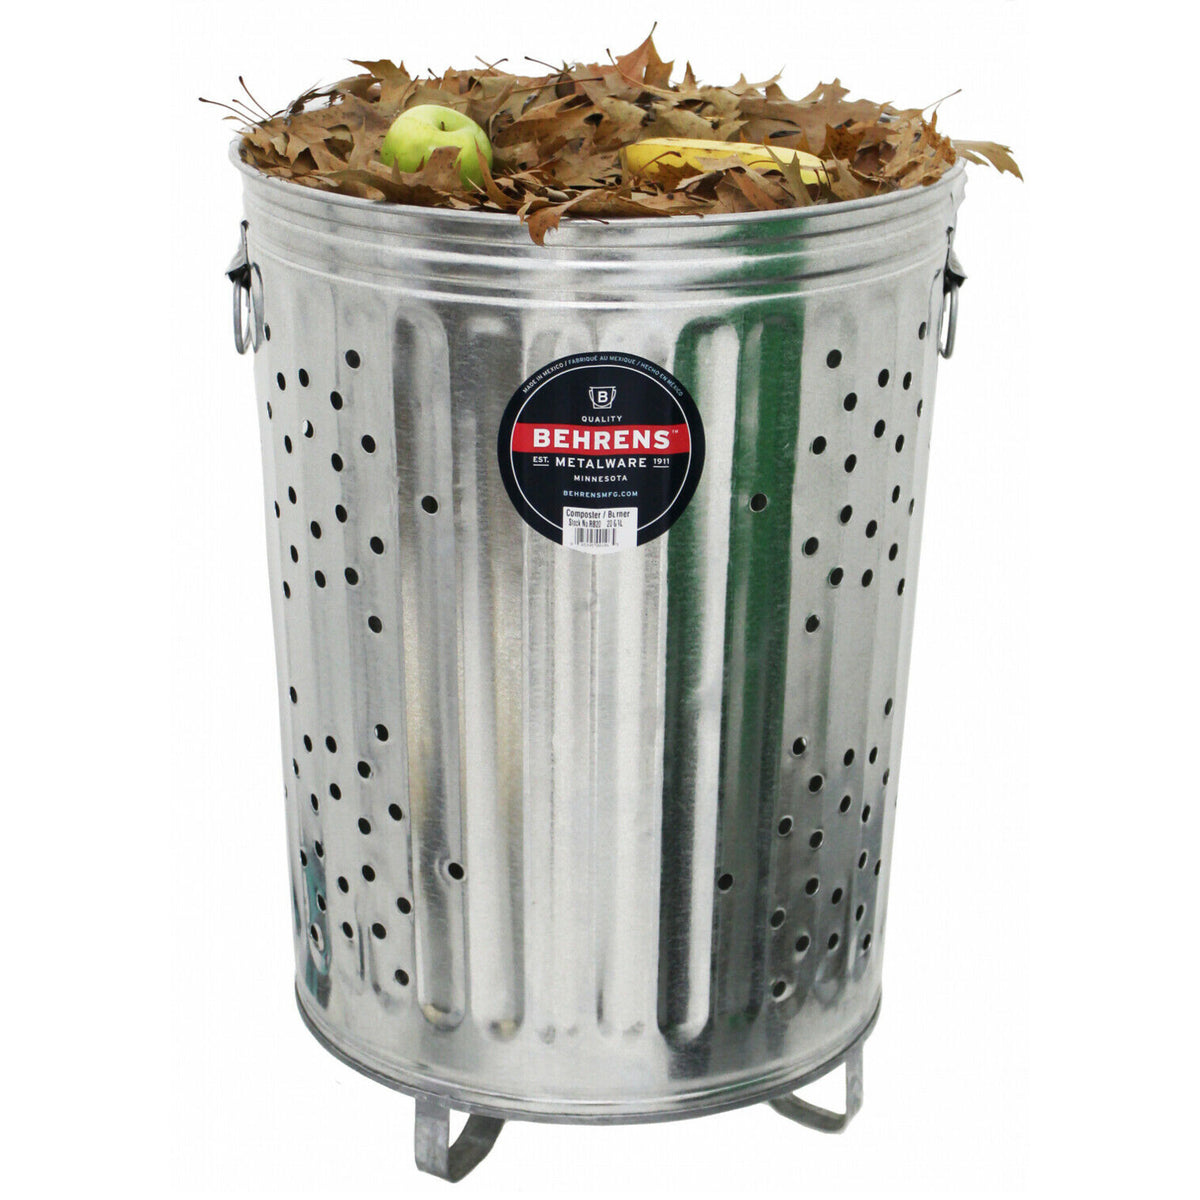 Behrens RB20 Trash Composter/Rubbish Burner with Cover, Galvanized Steel, 20 Gallon